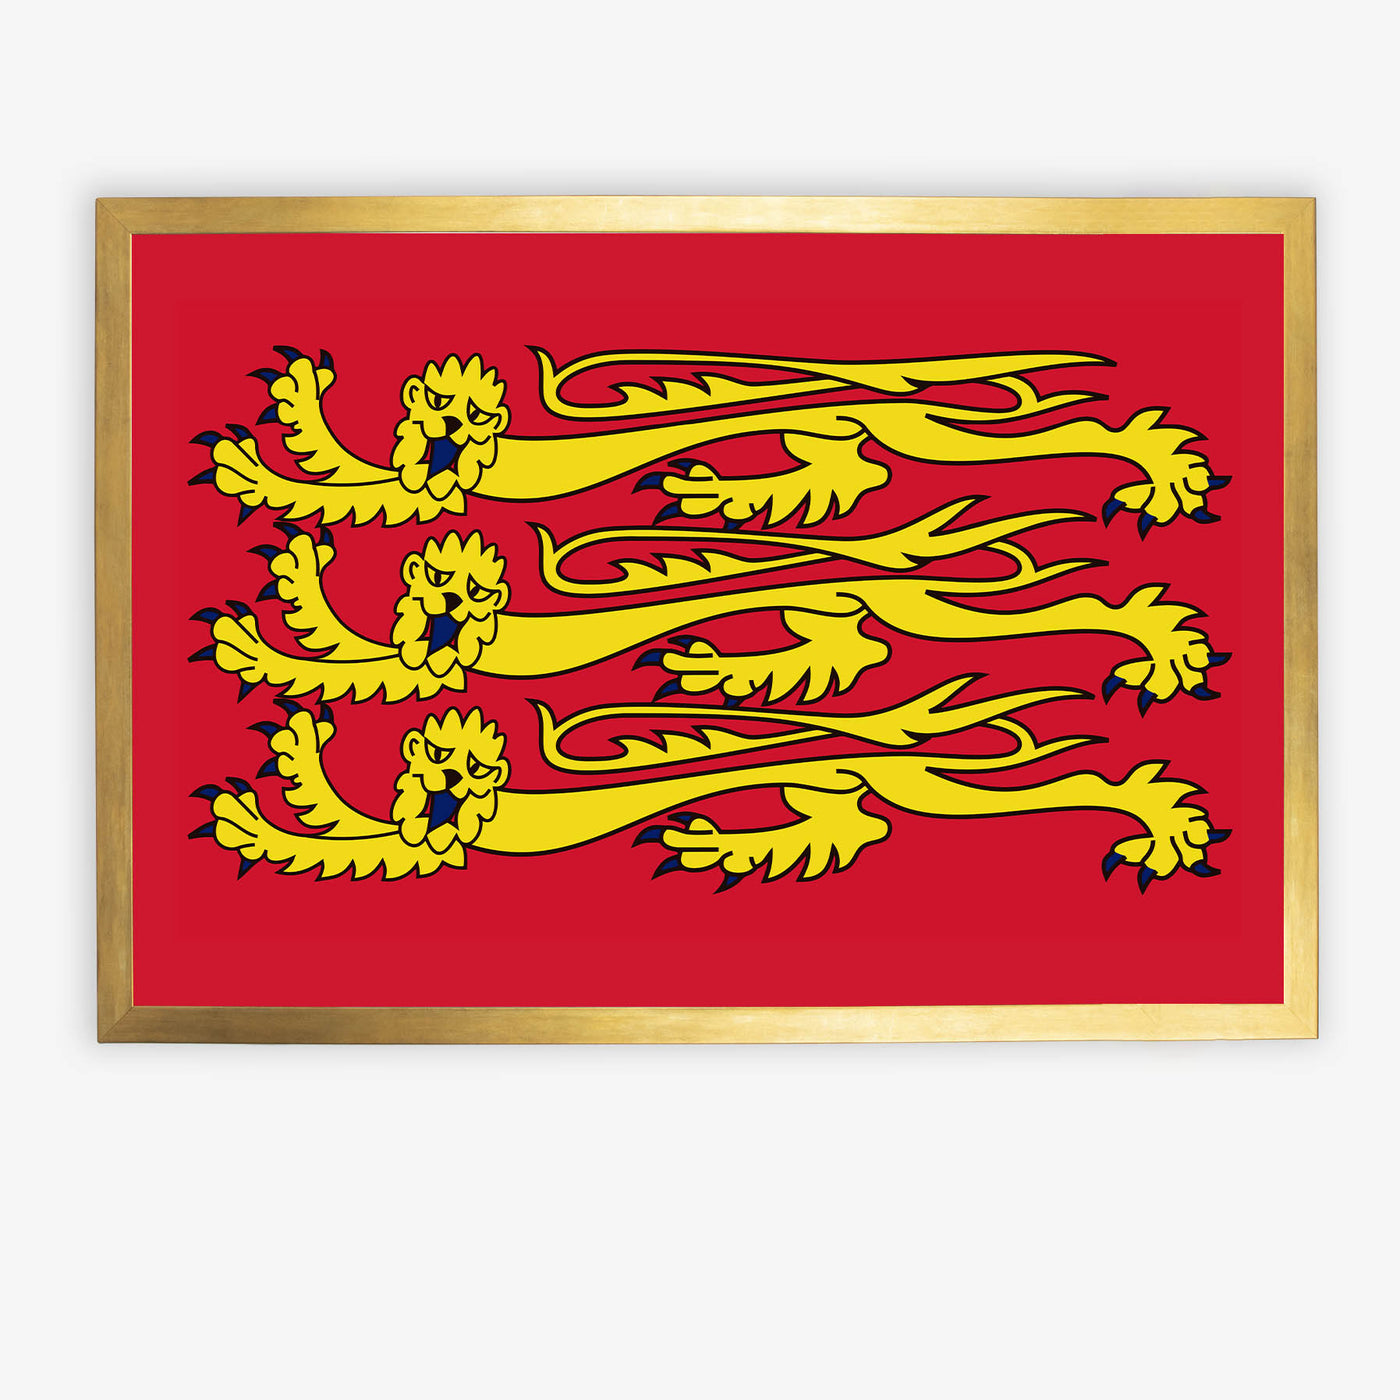 "Three Lions Royal Standard of England" on Framed Prints, Canvas, Aluminium, Acrylic or Print-only